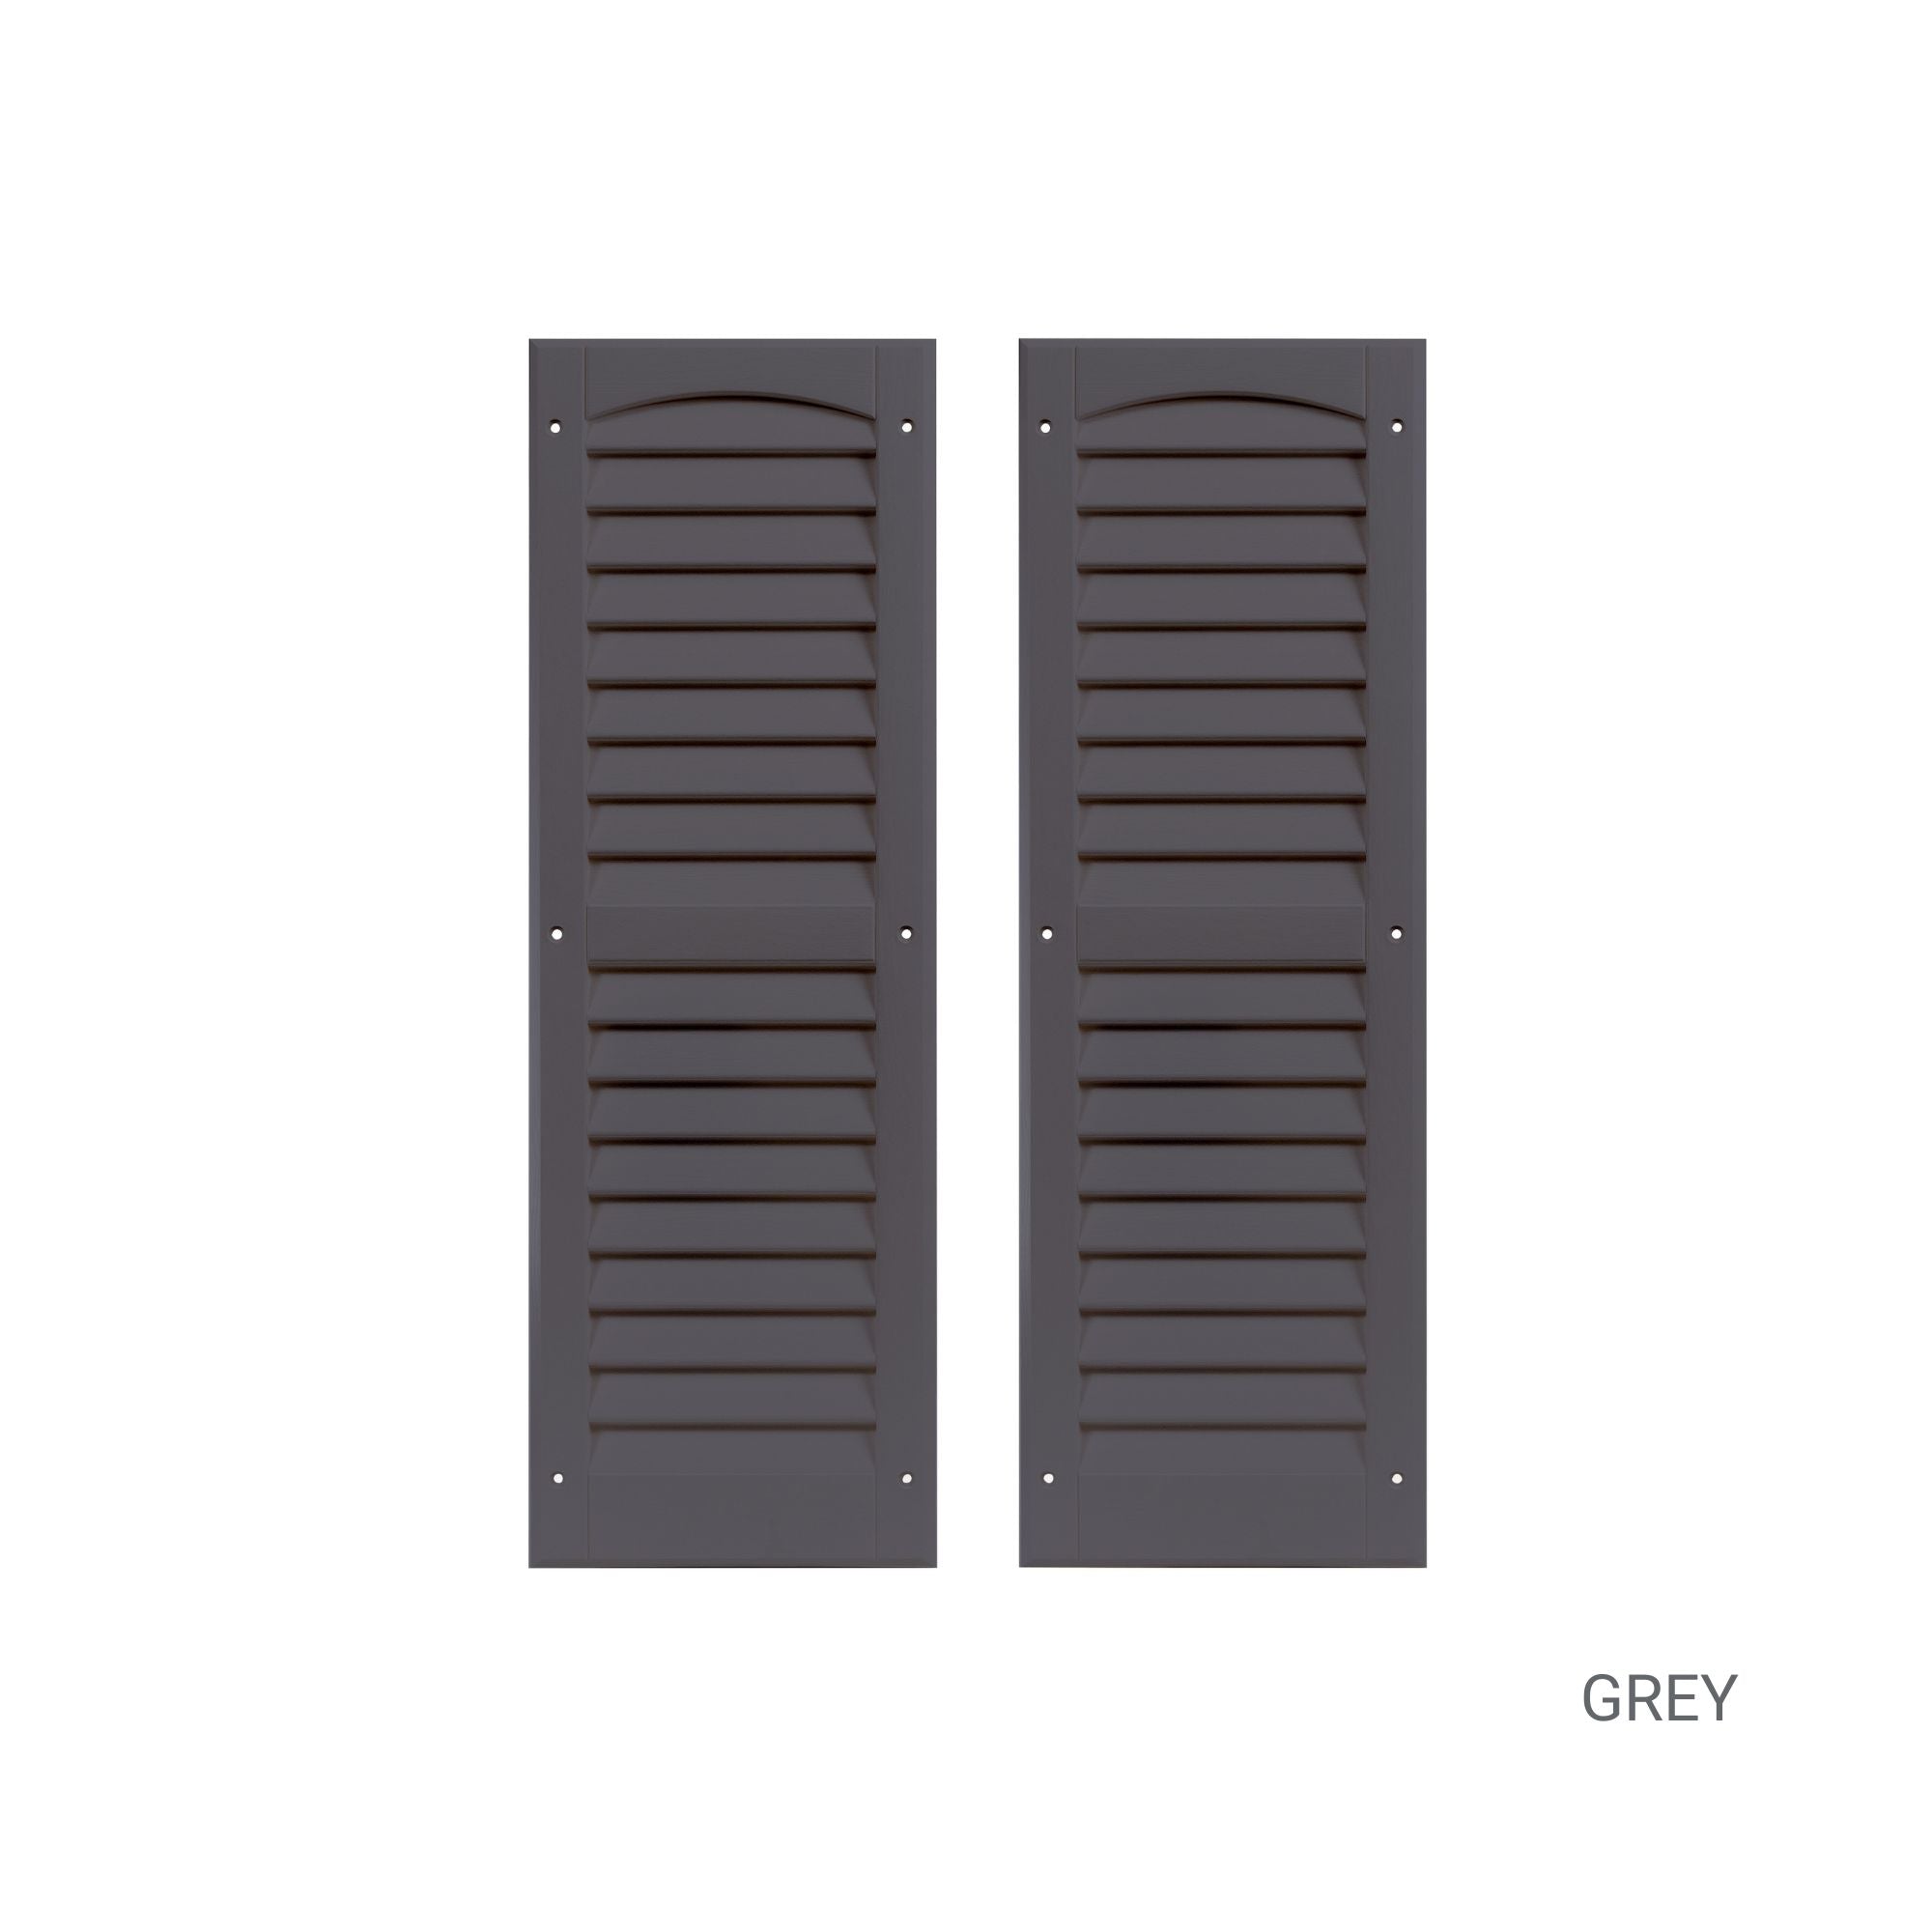 Pair of 9" W x 27" H Louvered Grey Shutters for Sheds, Playhouses, and MORE